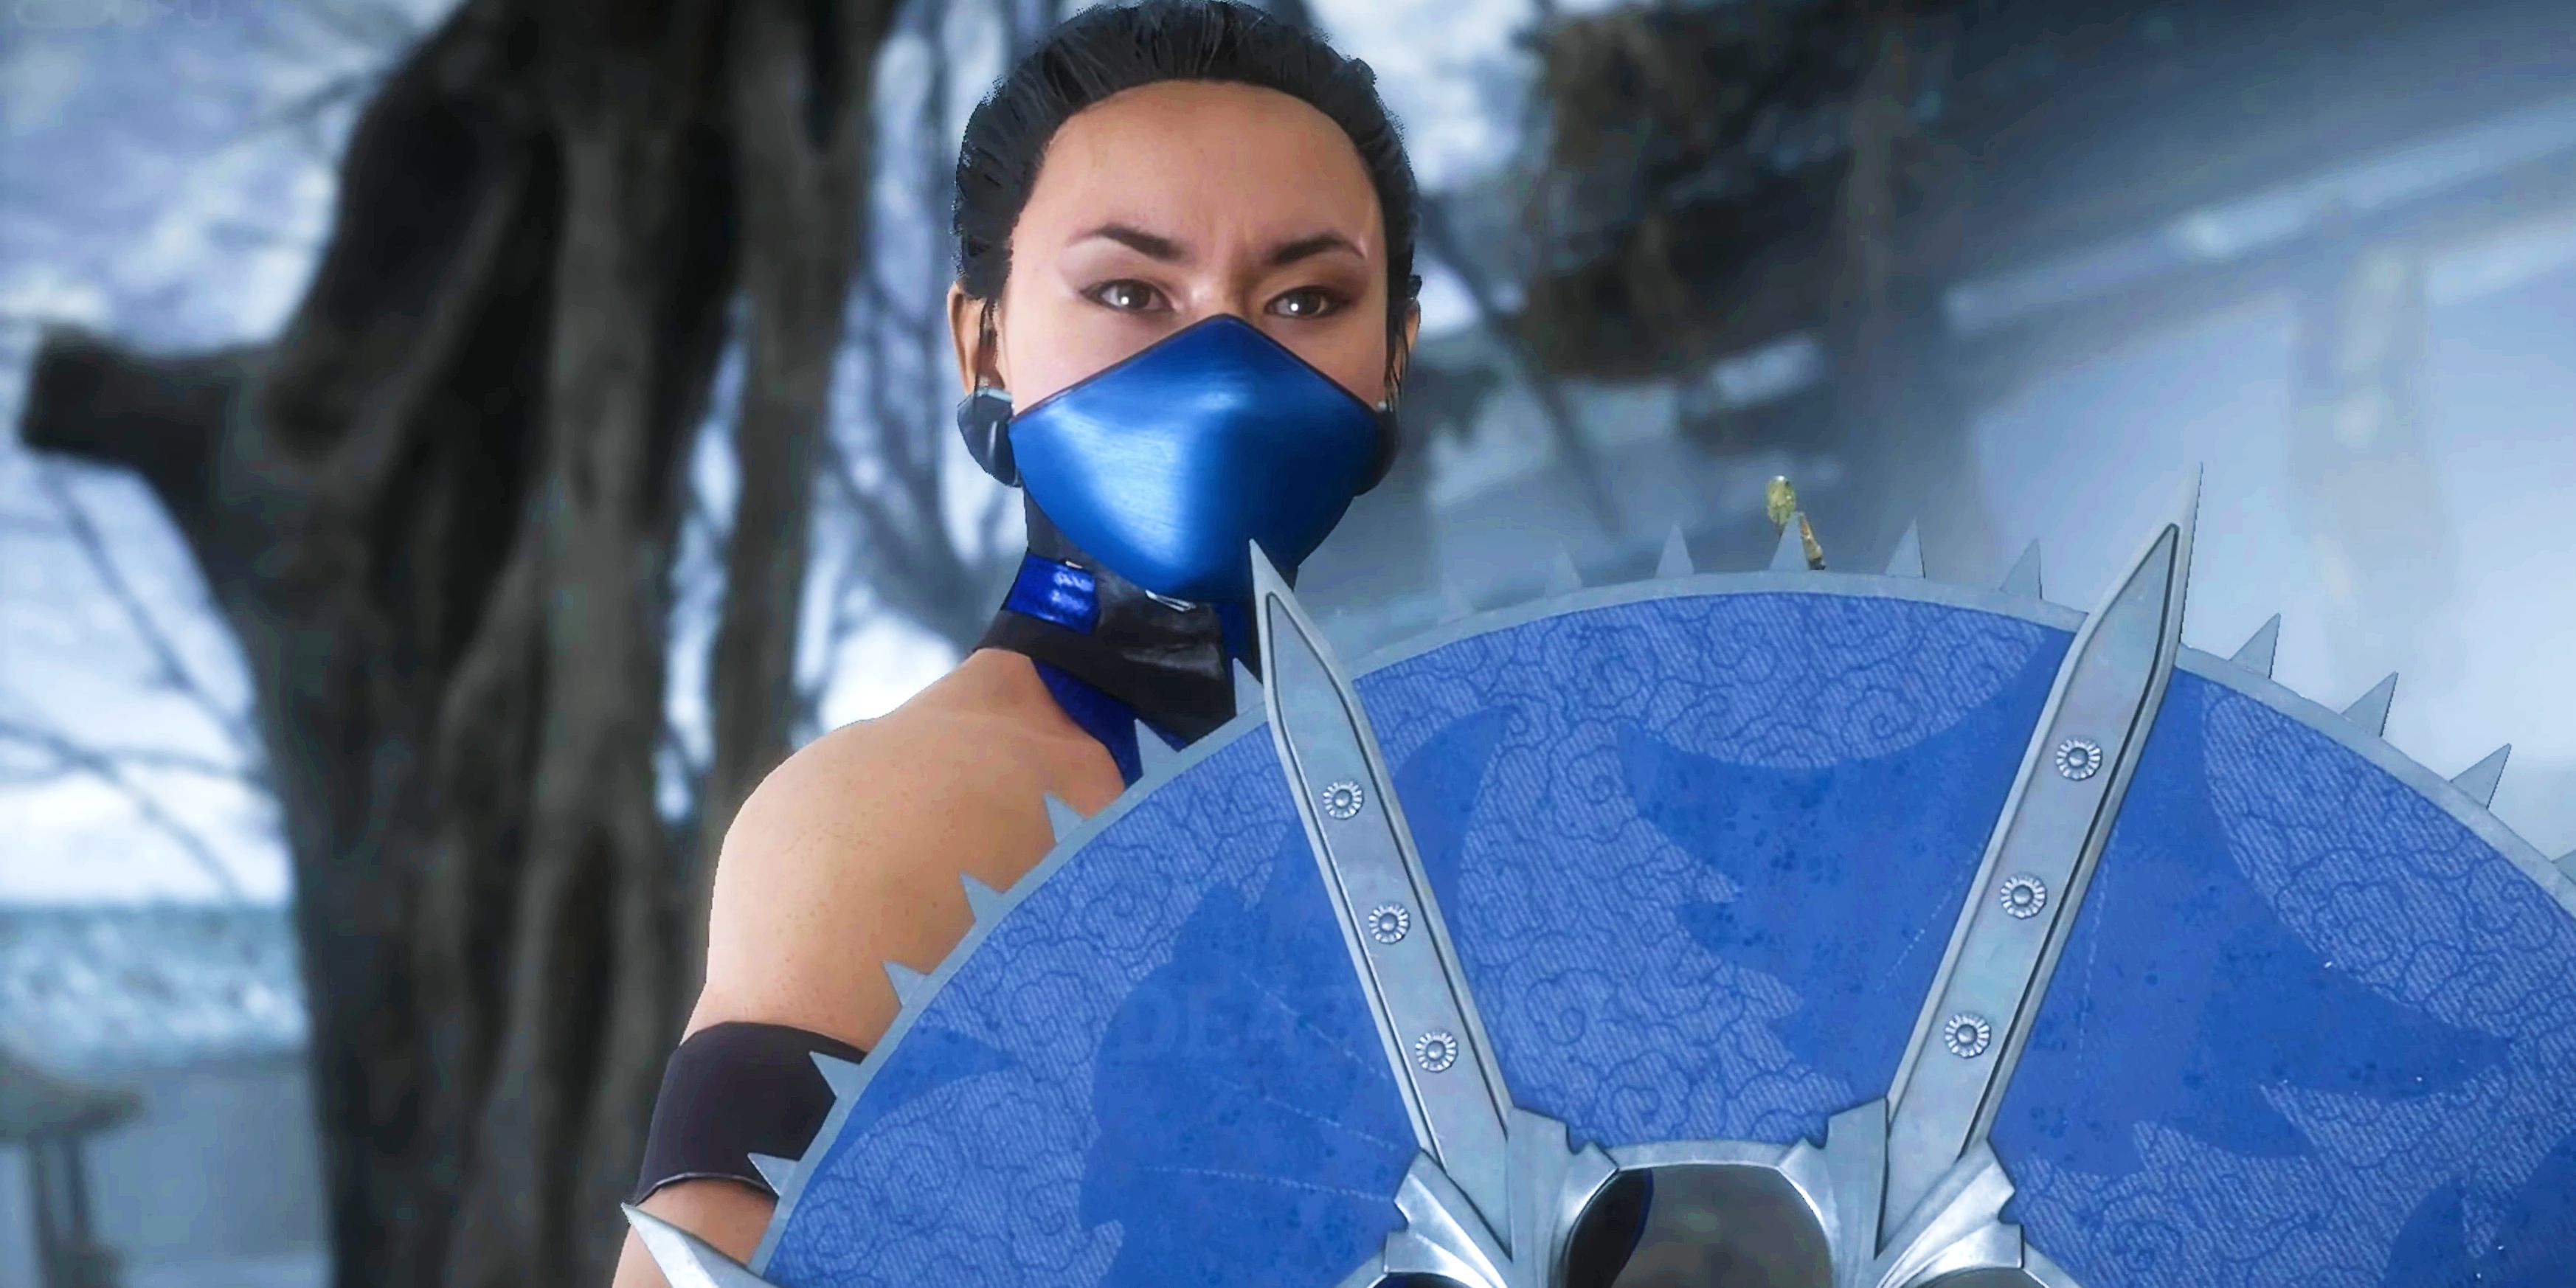 8 New Mortal Kombat 2 Characters From The Video Games Explained